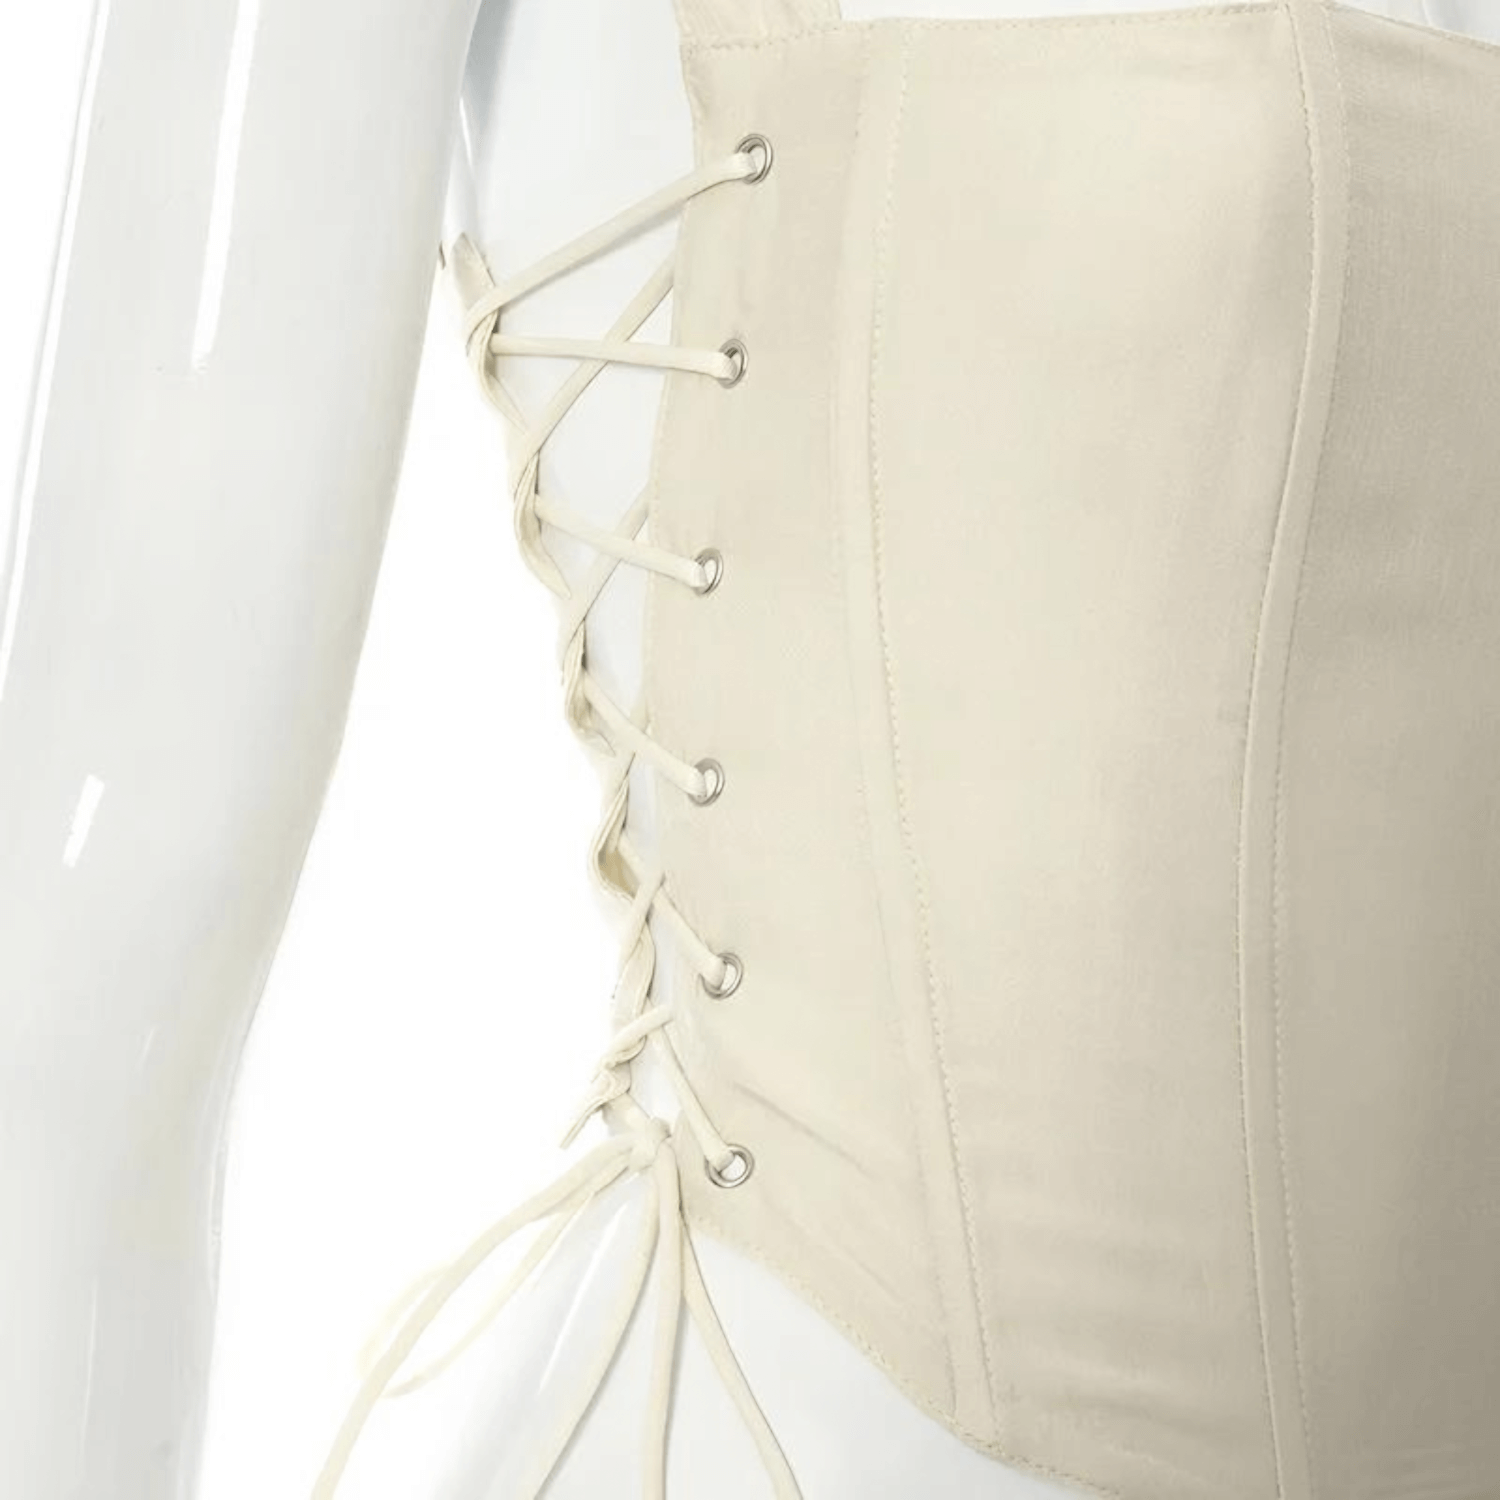 Corset String Lateral